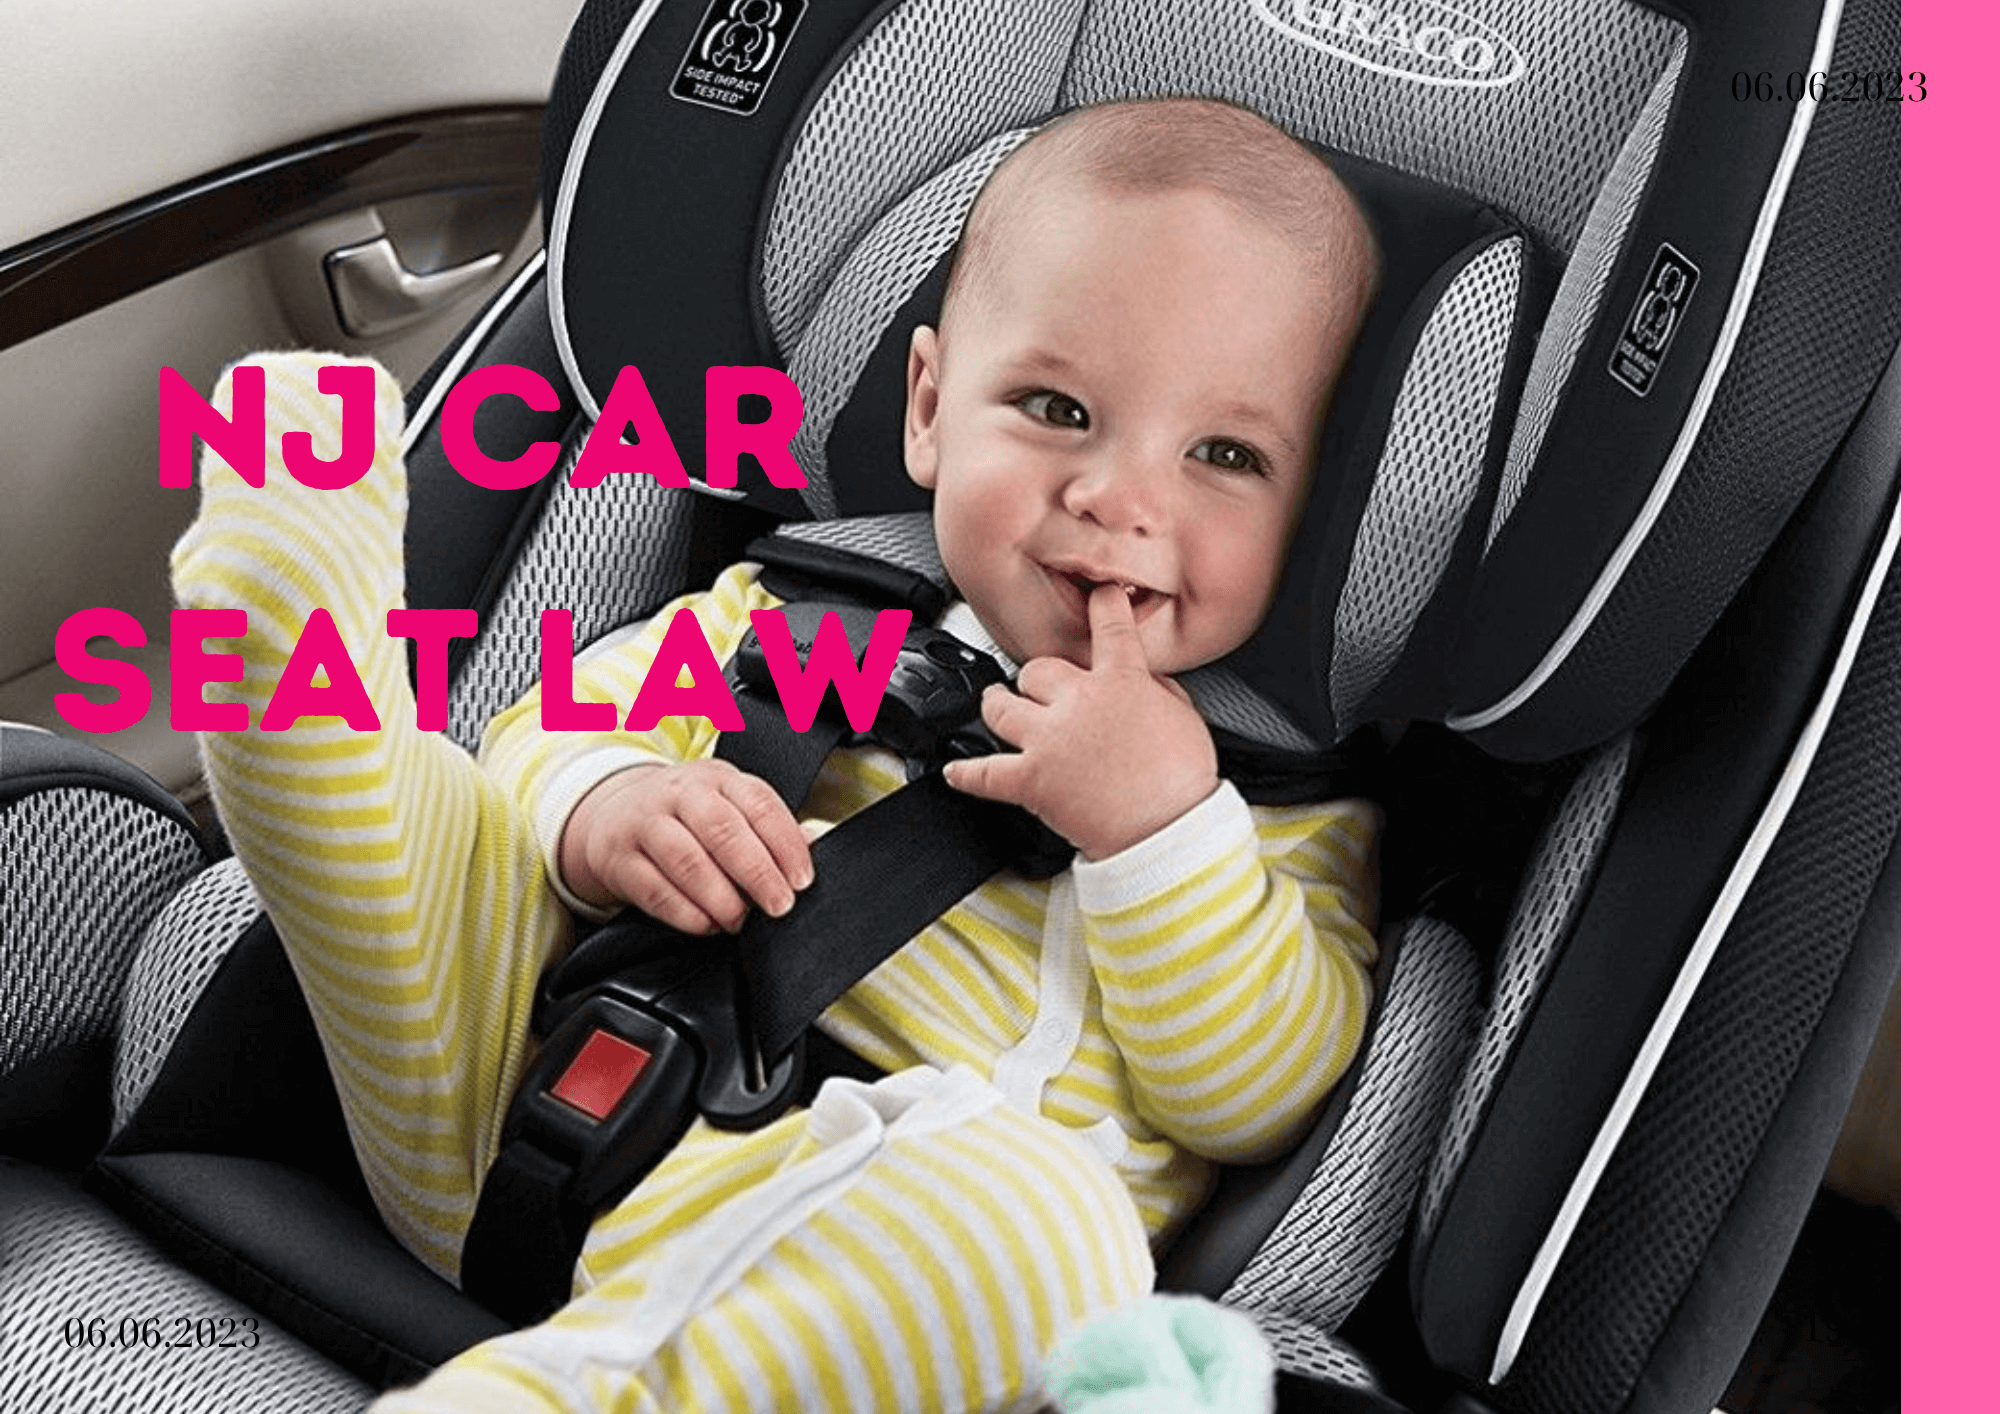 Nj Car Seat Law Guidelines For Child Safety On The Road Snug Baby Zone